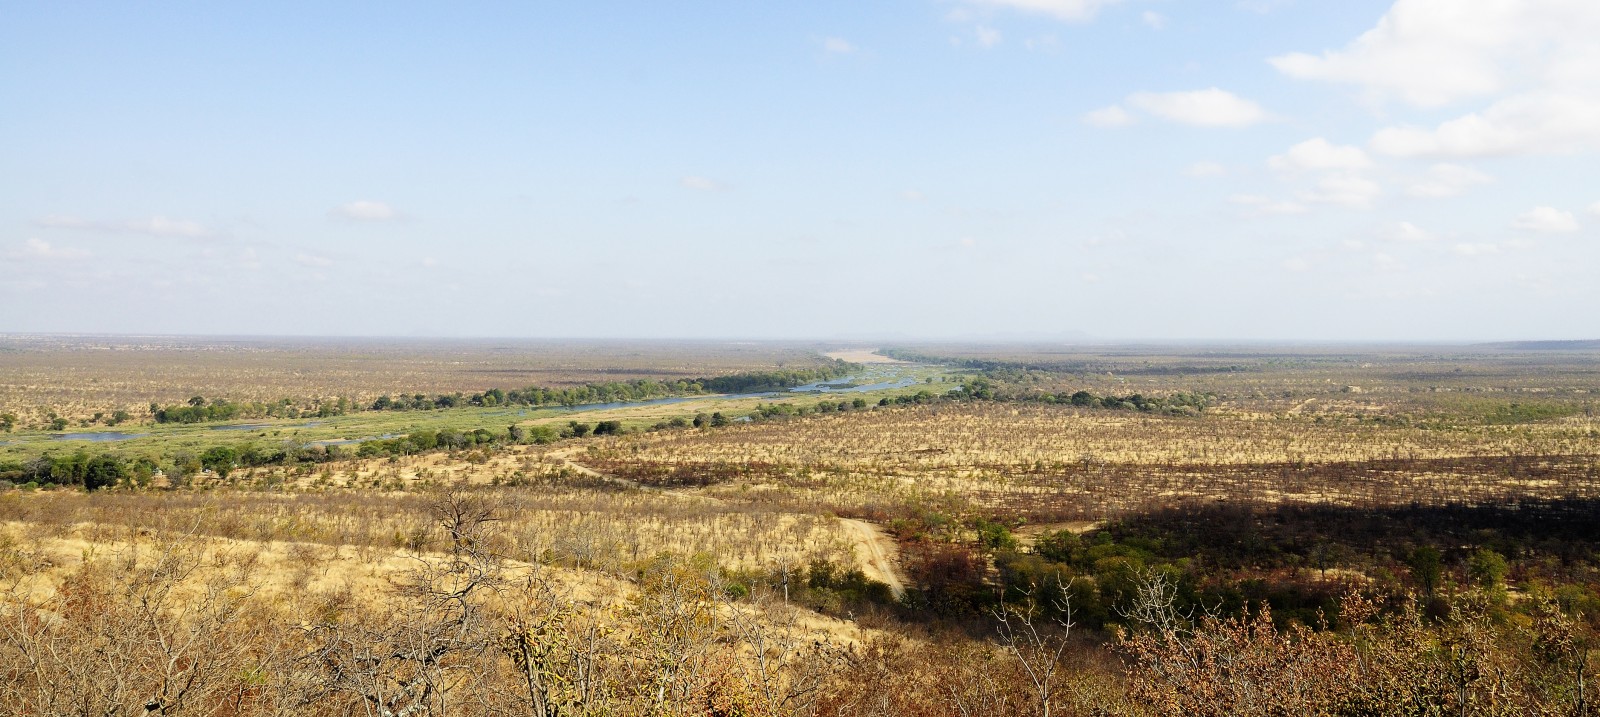 The Runde River flows through southeastern Zimbabwe, where rainfall between October 2015 and February 2016 was less than 65 percent of the long-term average. Photo courtesy Andrew Ashton via Flickr Creative Commons